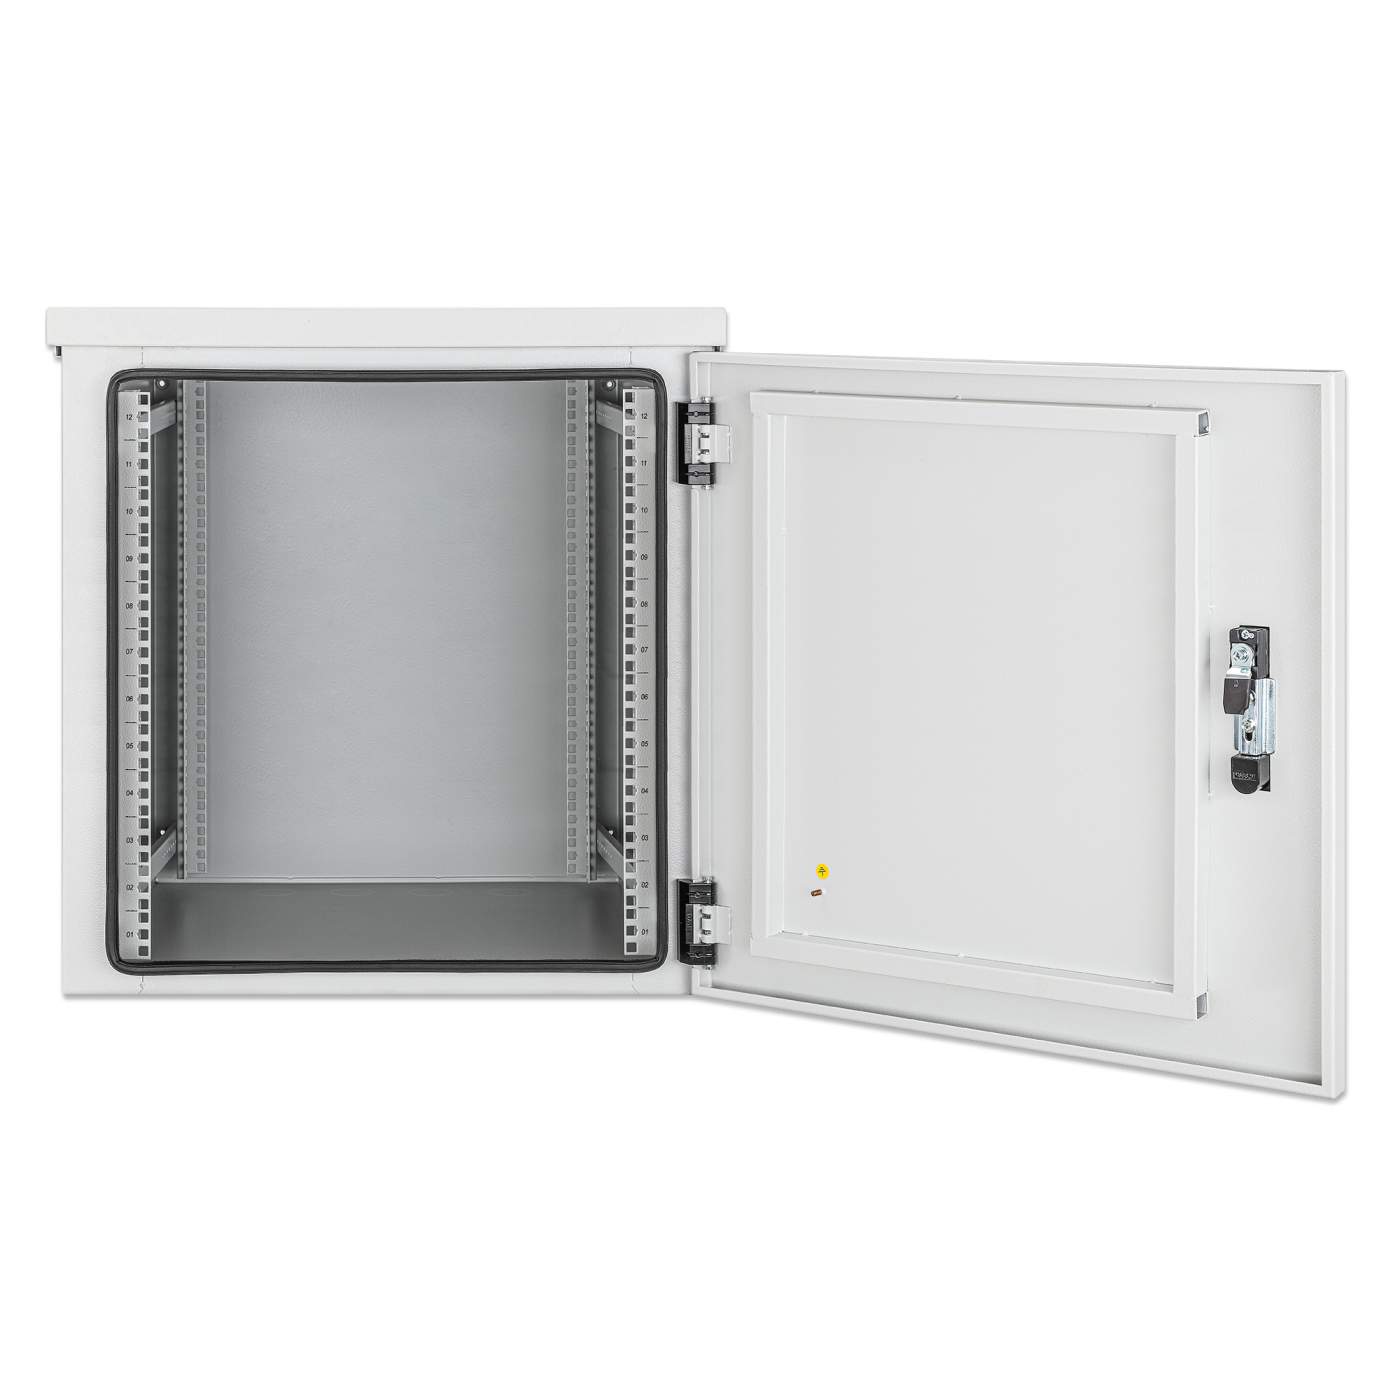 Industrial IP55 19" Wall Mount Cabinet with Integrated Fans, 12U Image 5